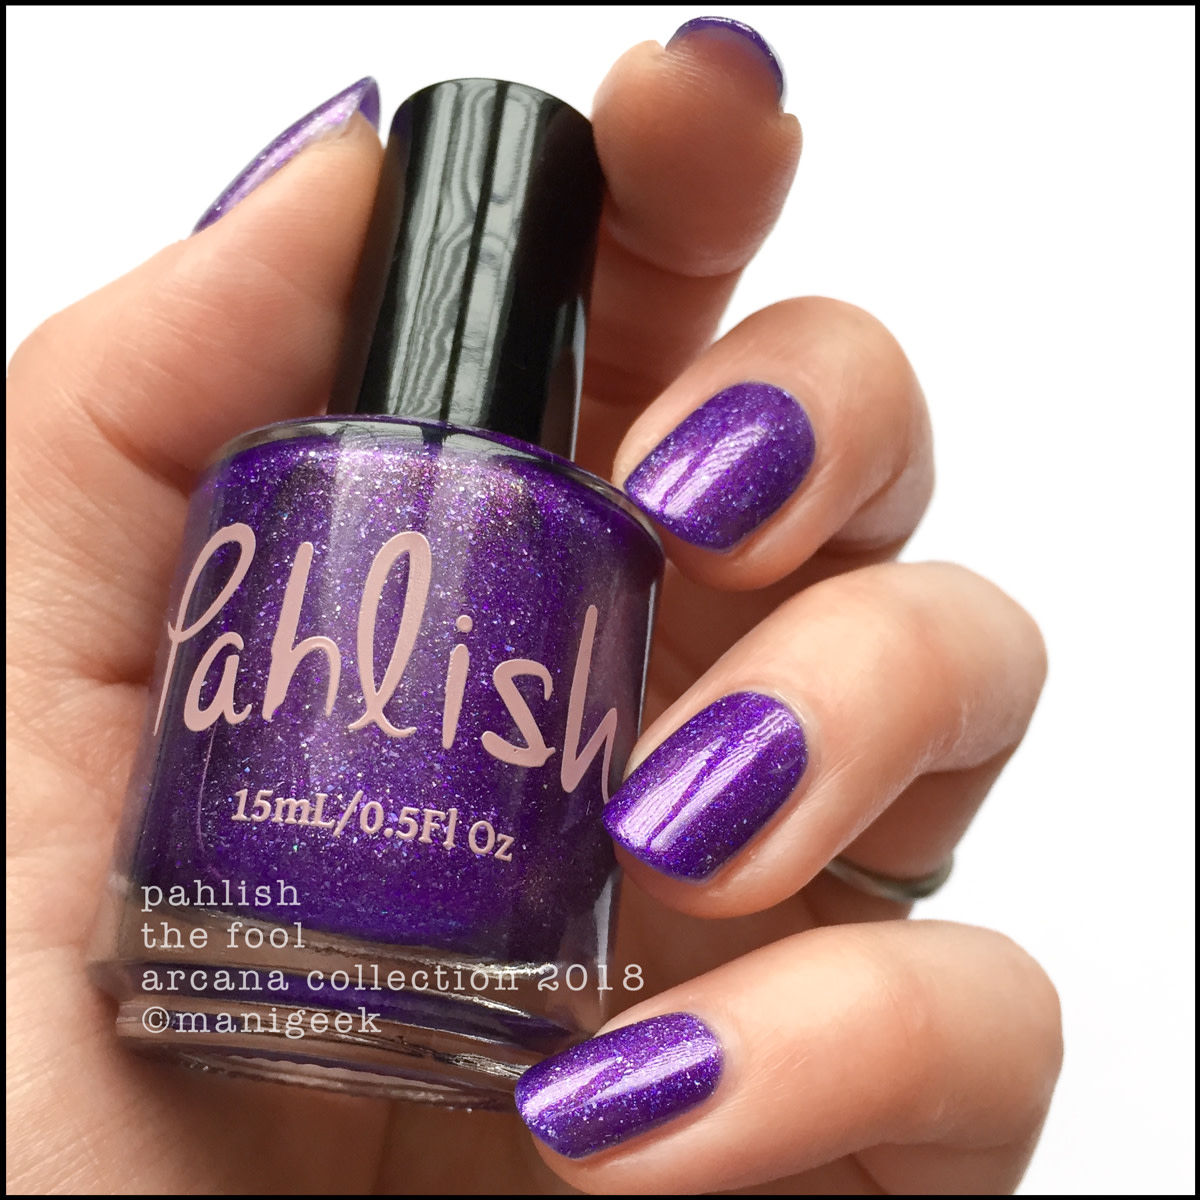 Pahlish The Fool - Pahlish Arcana Collection Swatches Review 2018